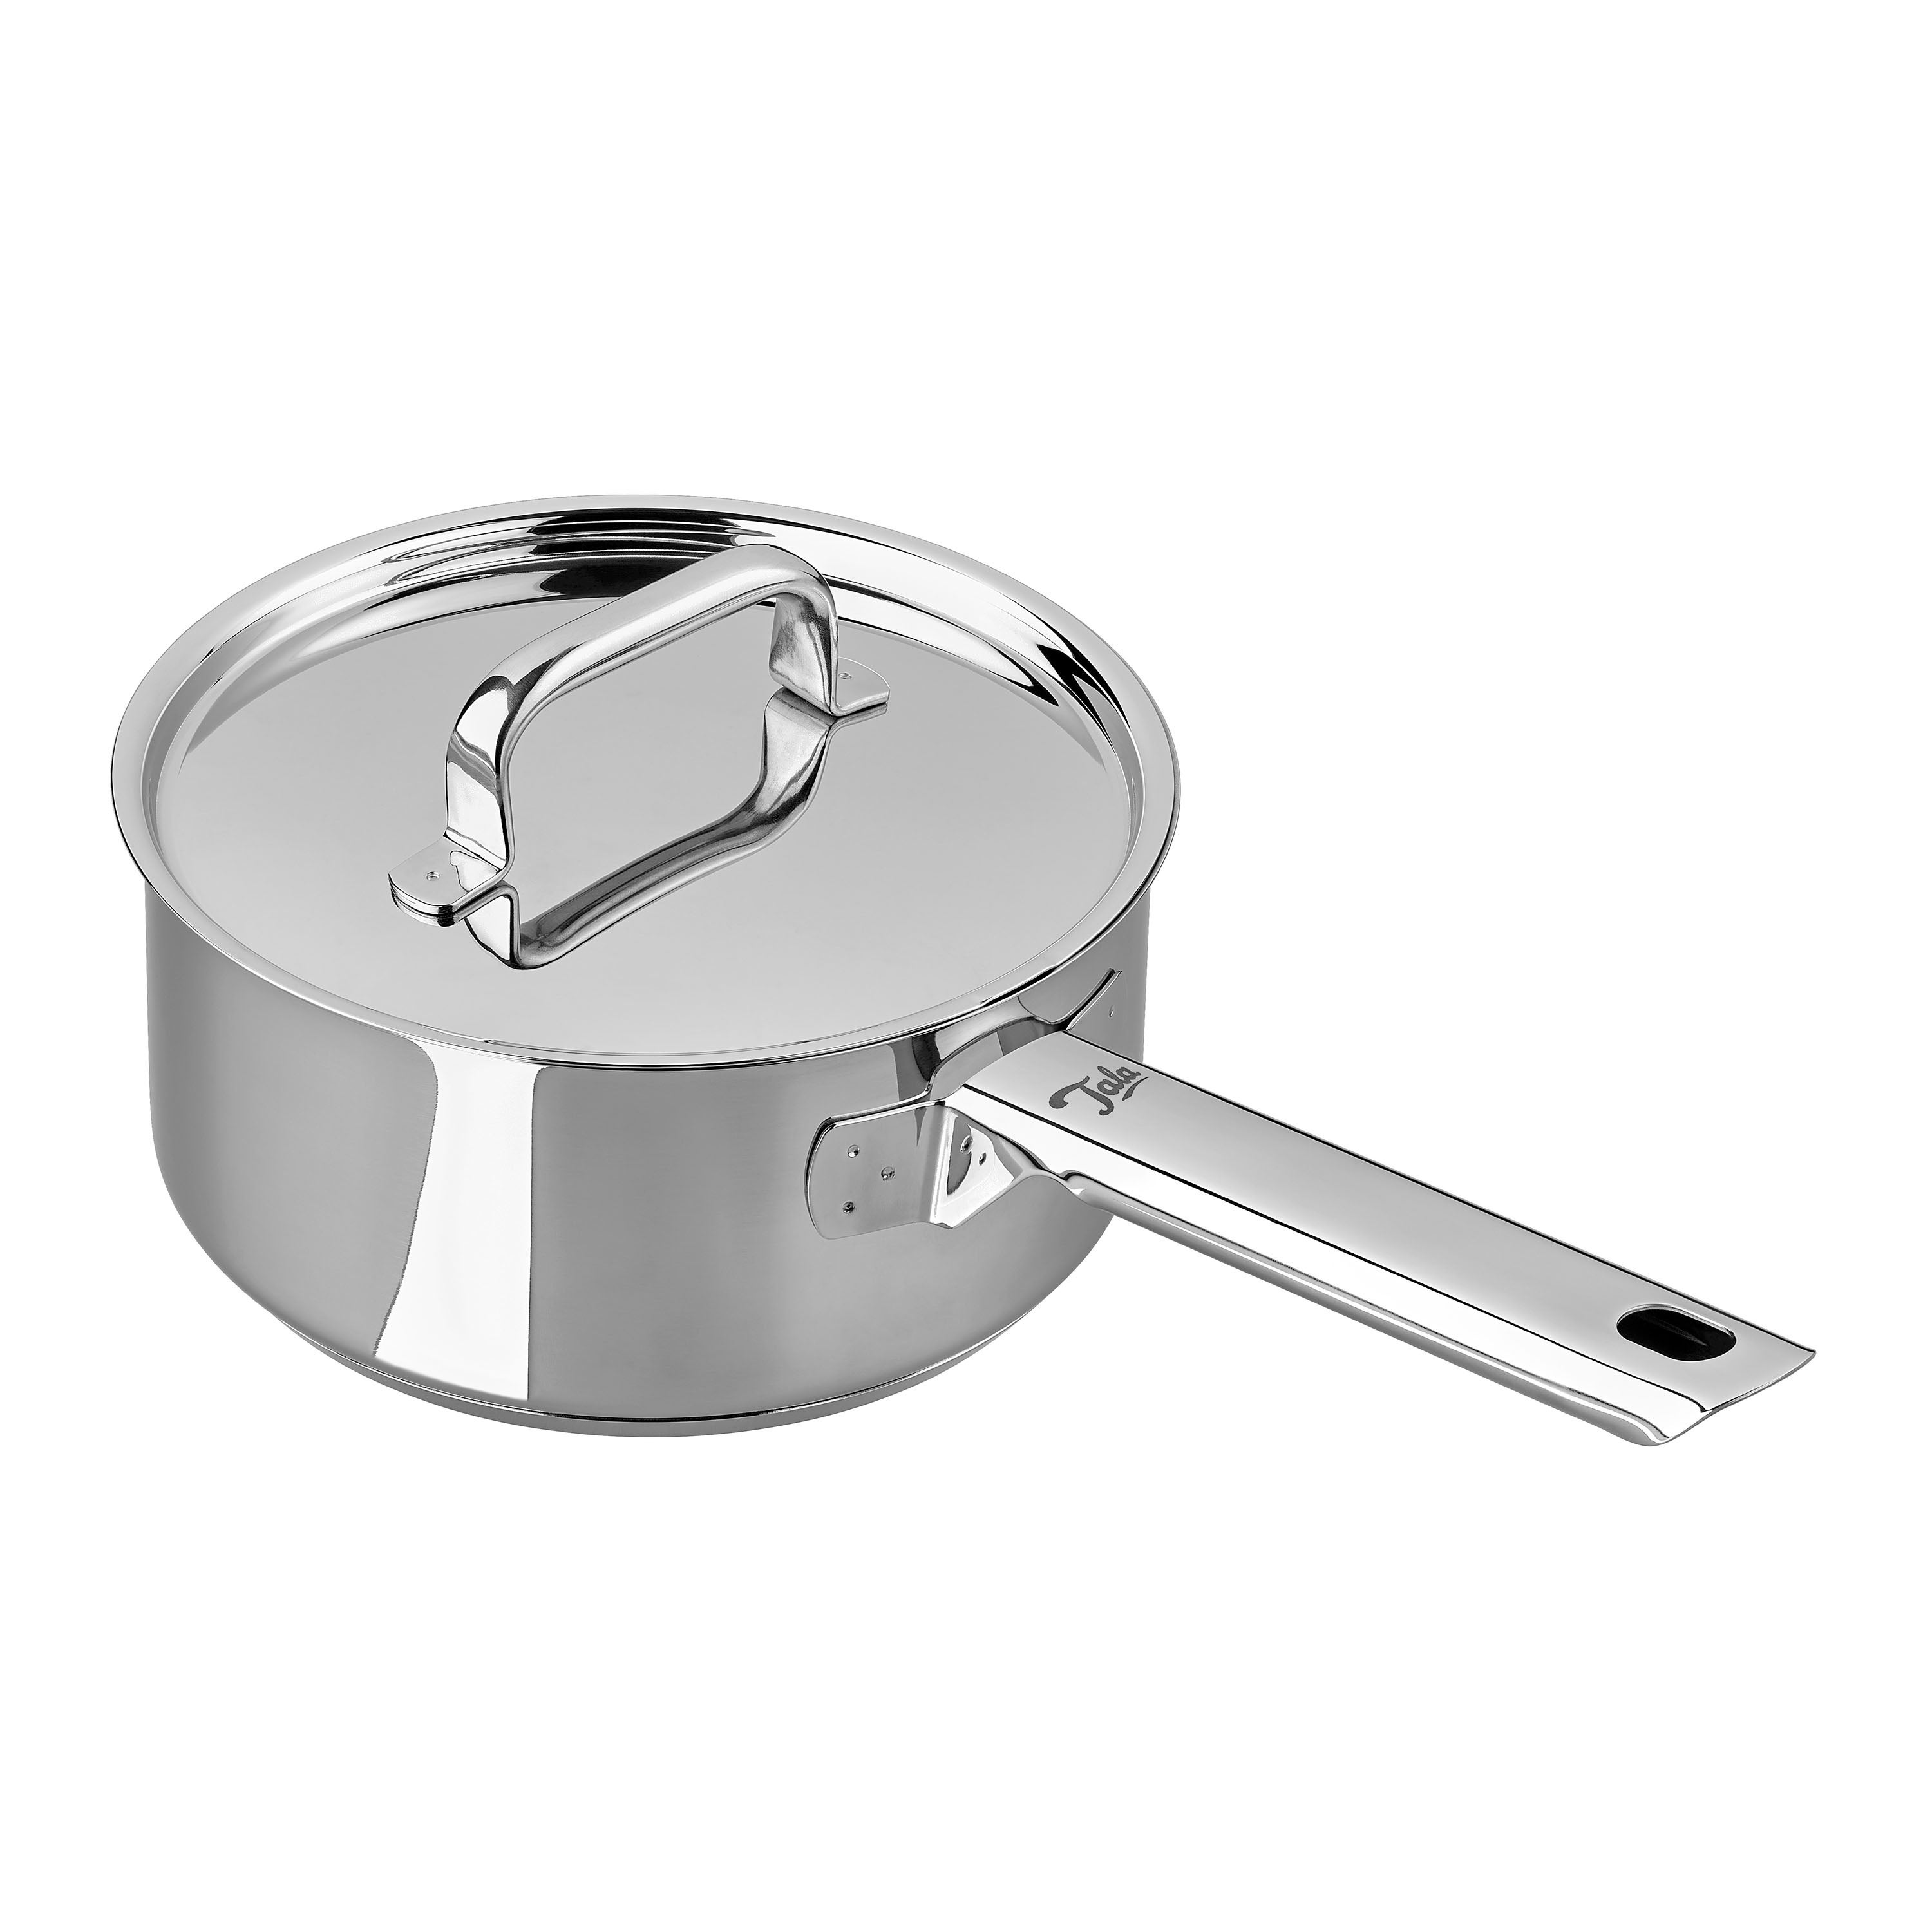 Tala Performance Superior Stainless Steel Saucepan with Lid, 16cm